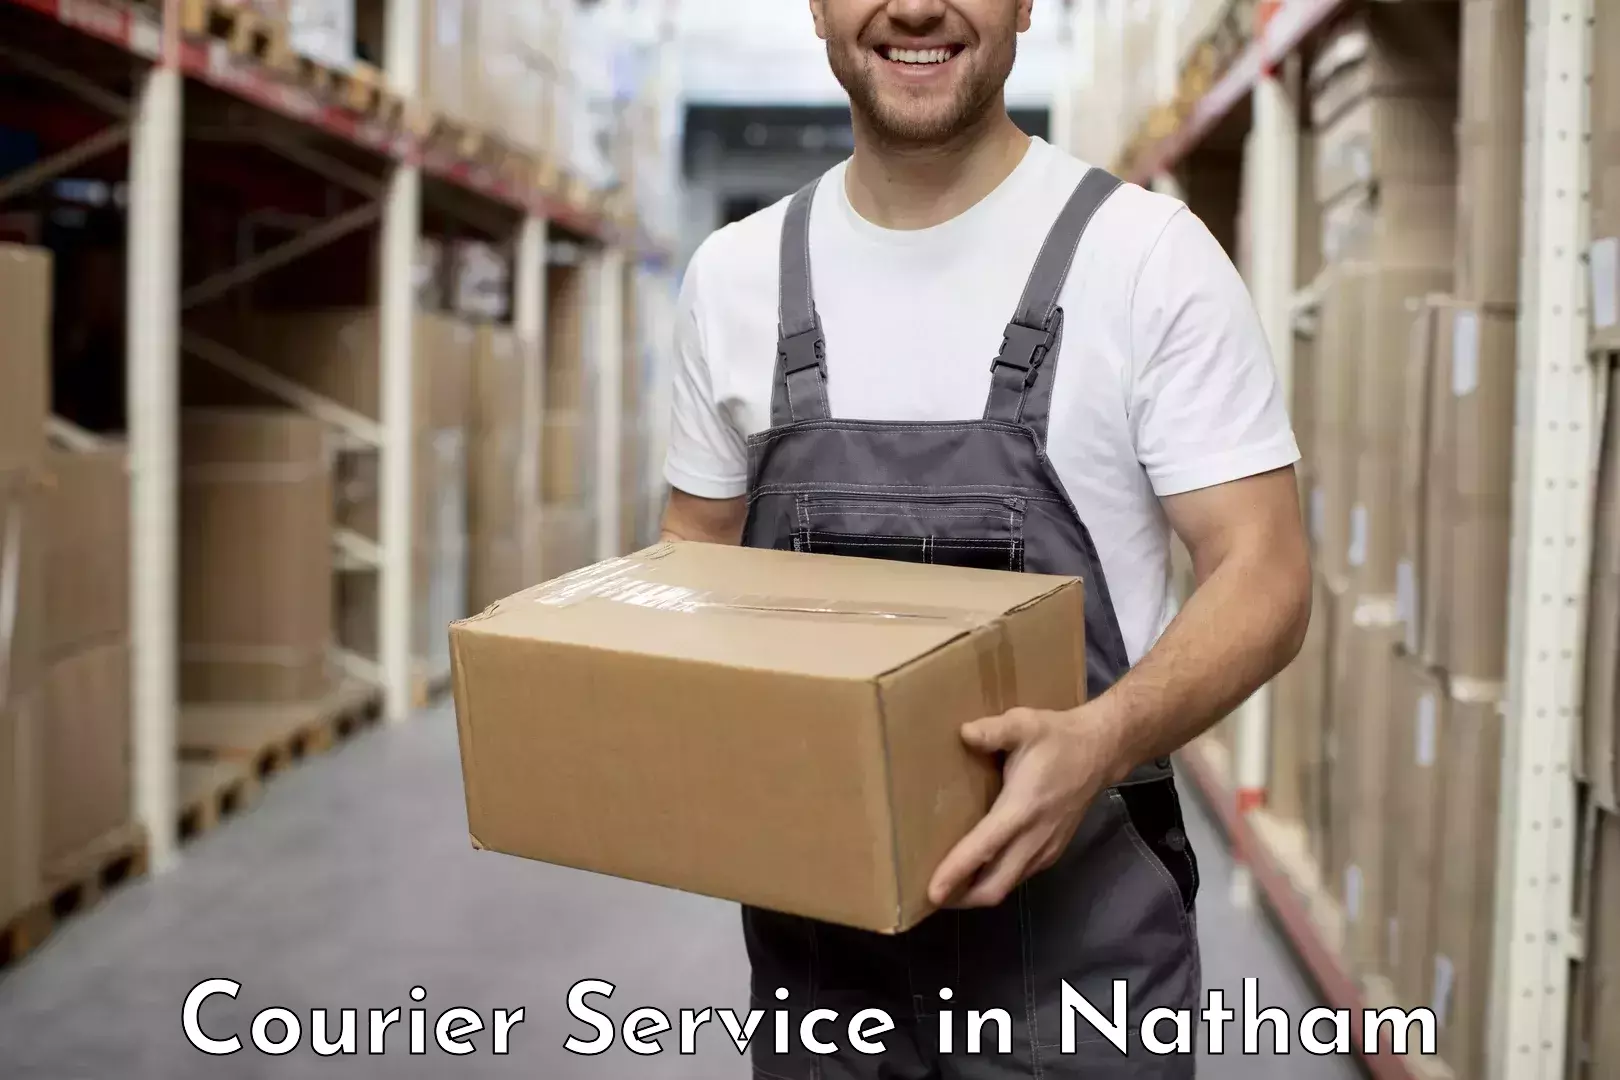 Overnight delivery services in Natham